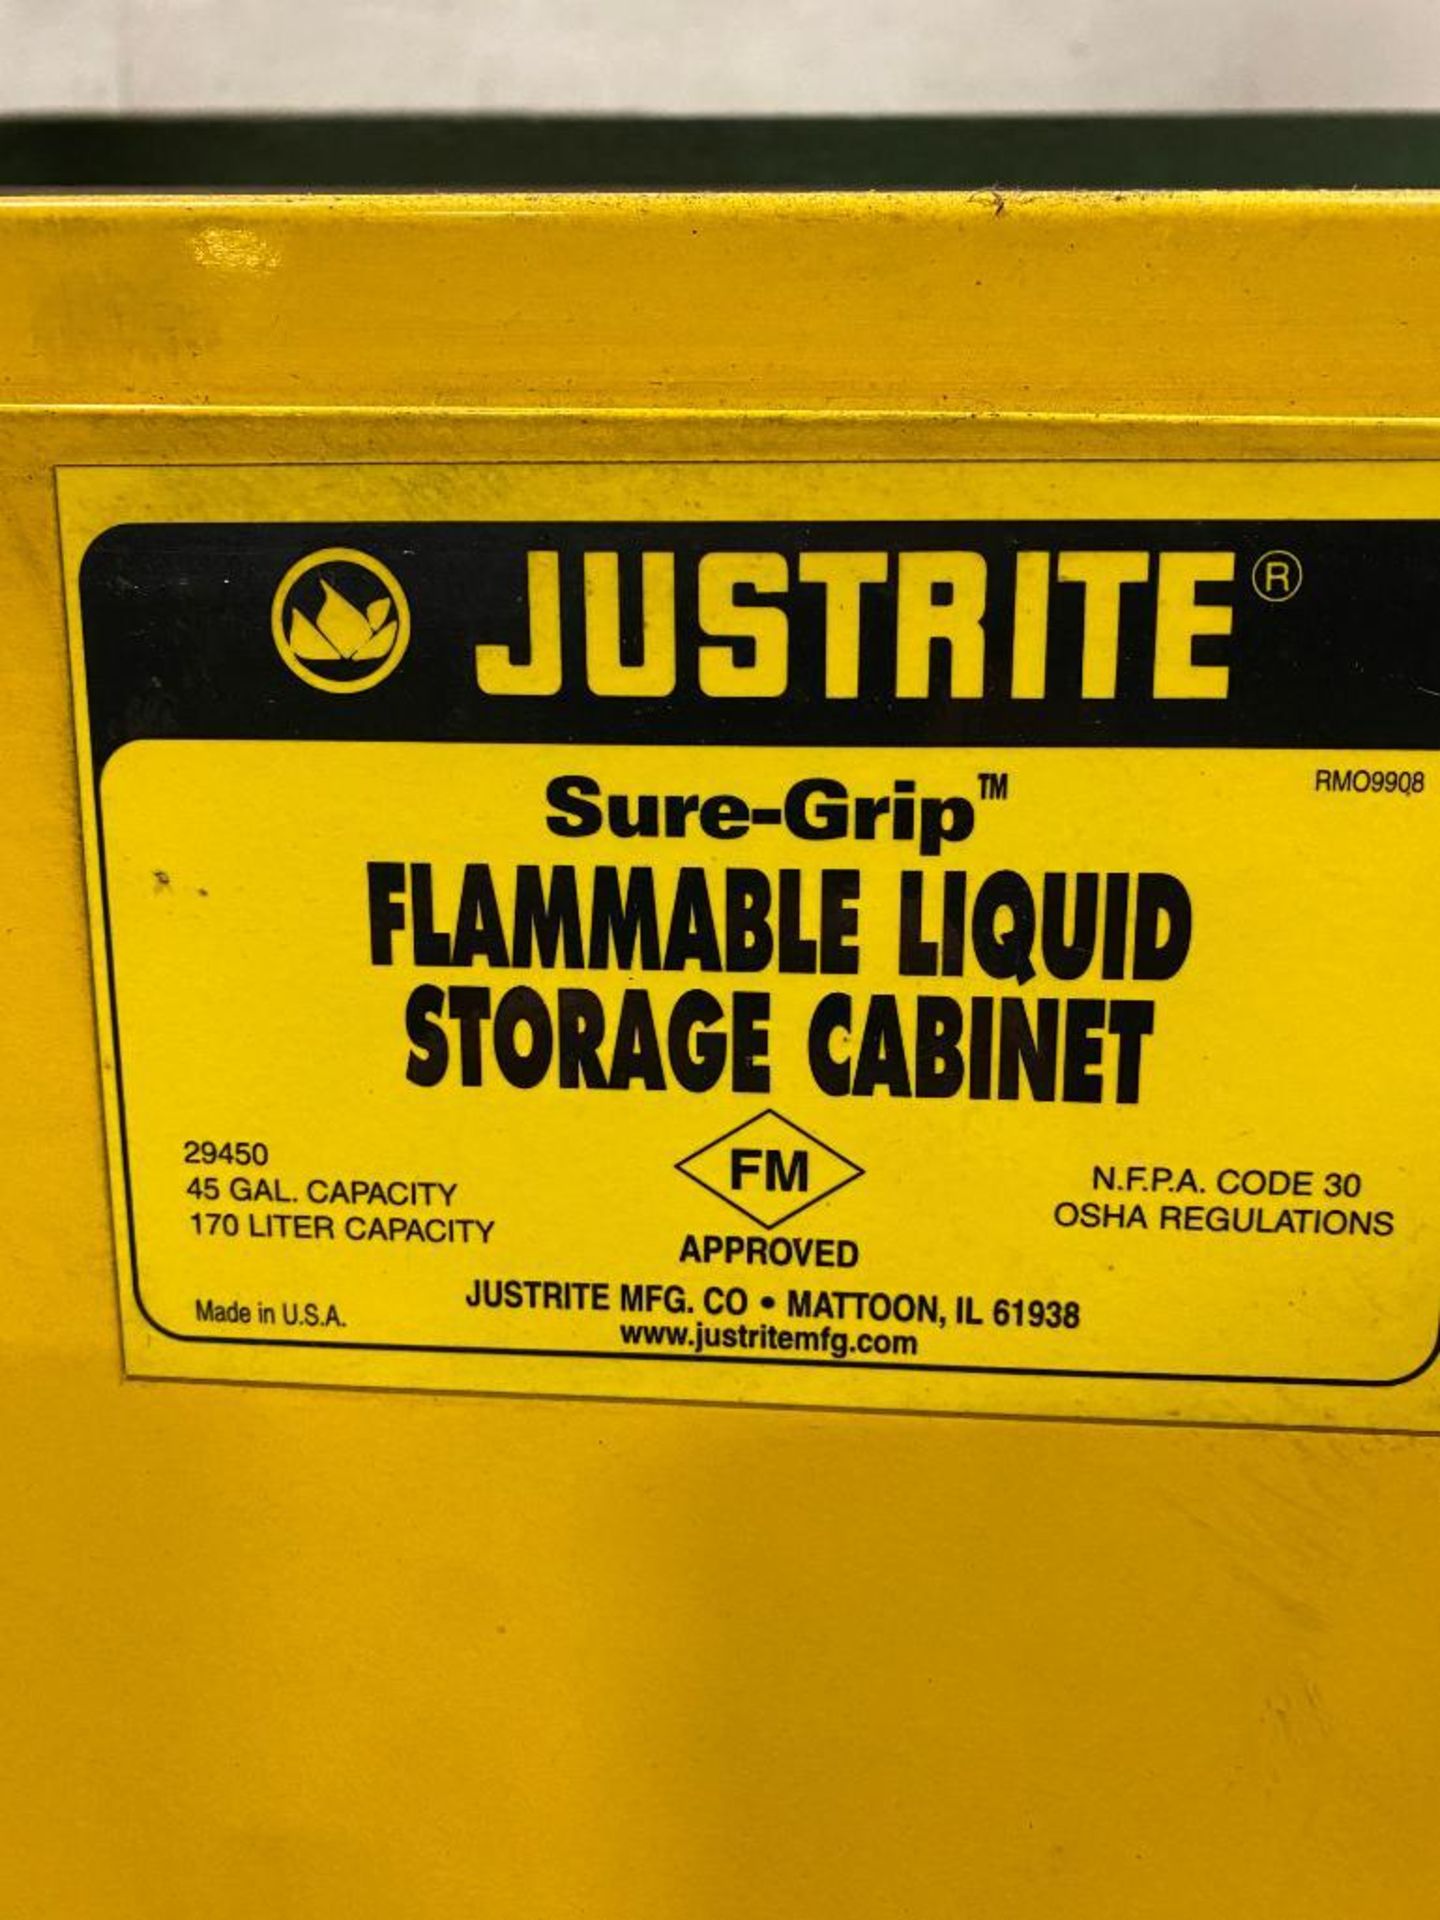 Just-Rite Flammable Liquid Storage Cabinet, 45-Gal. Capacity - Image 2 of 2